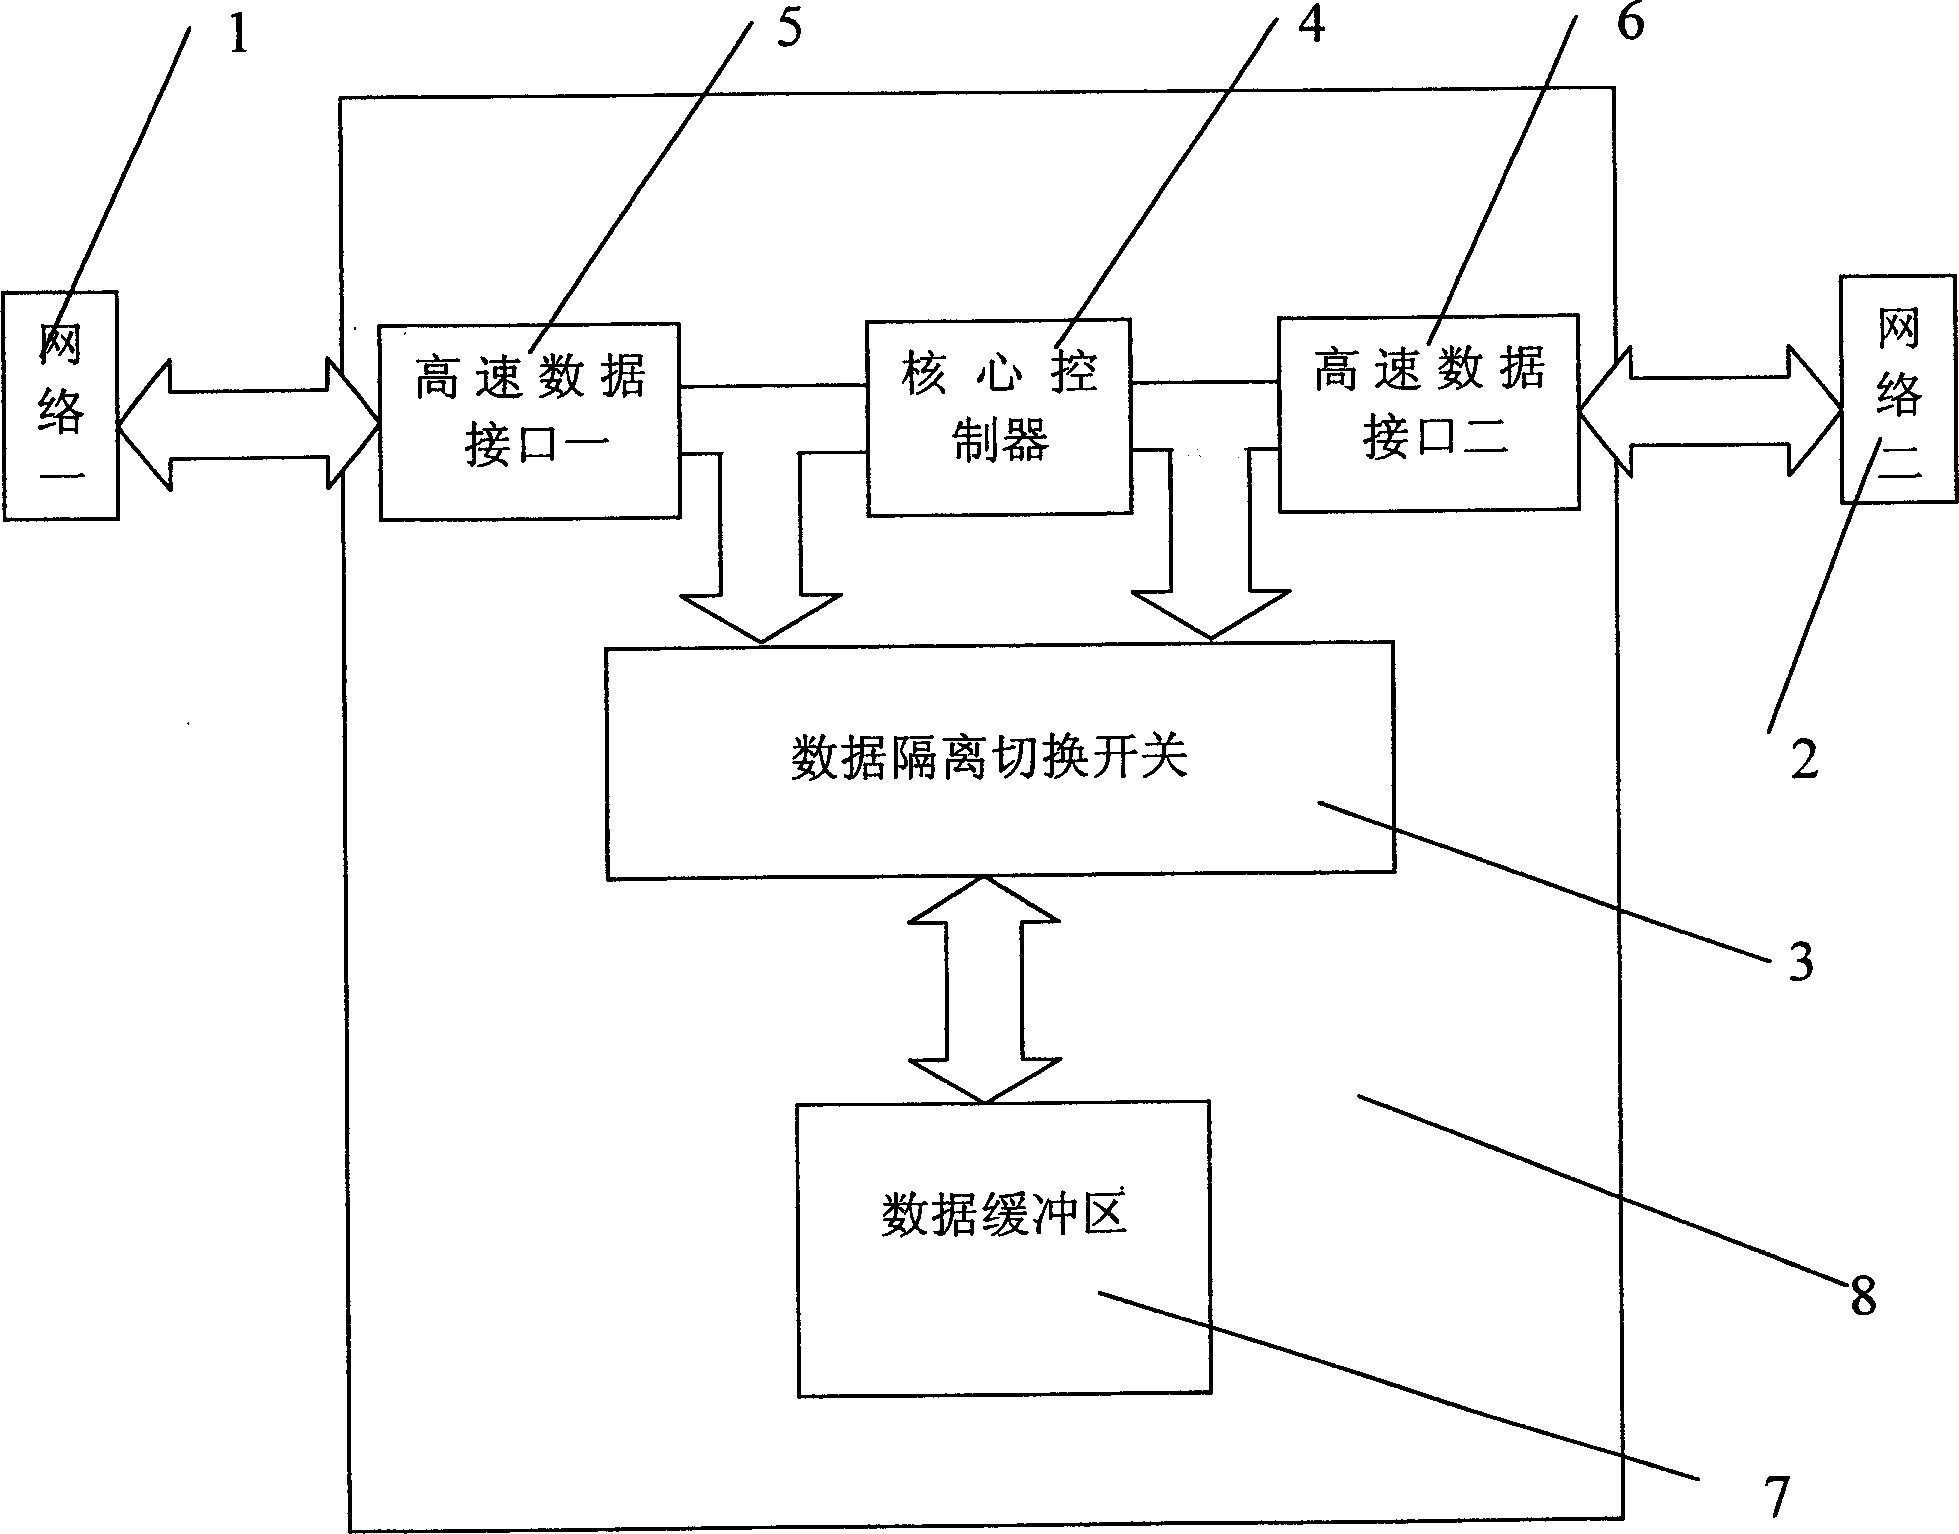 SCSI interface network data isolation and switching transmission method and device